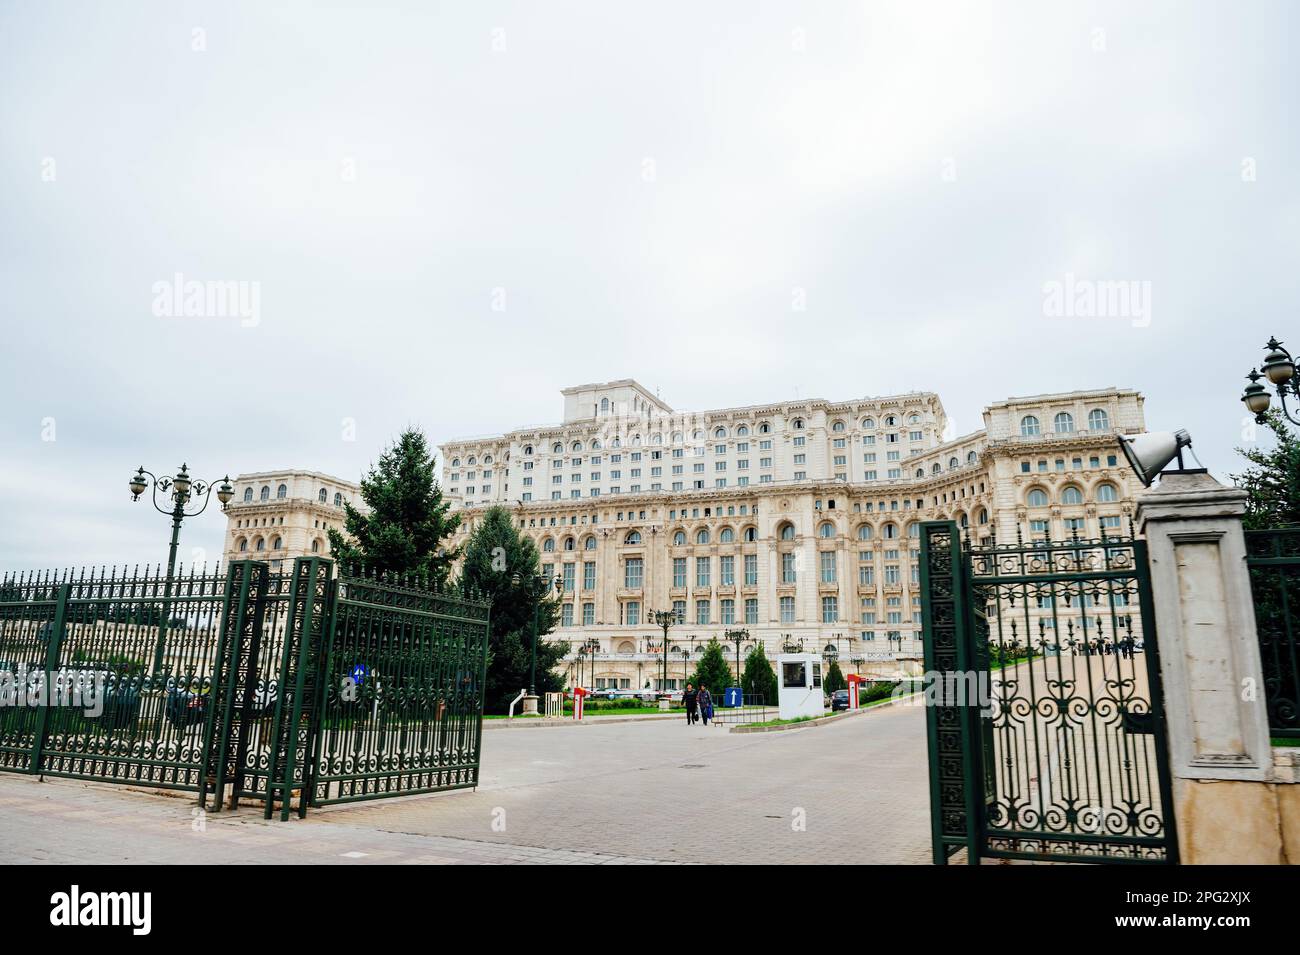 Bucharest, Romania - Oct 1, 2015: A beautiful, historical landmark in Bucharest - the largest building in Romania and famous for its architecture. The Casa Poporului or Palatul Poporului is a popular destination for sightseeing and travel. Stock Photo